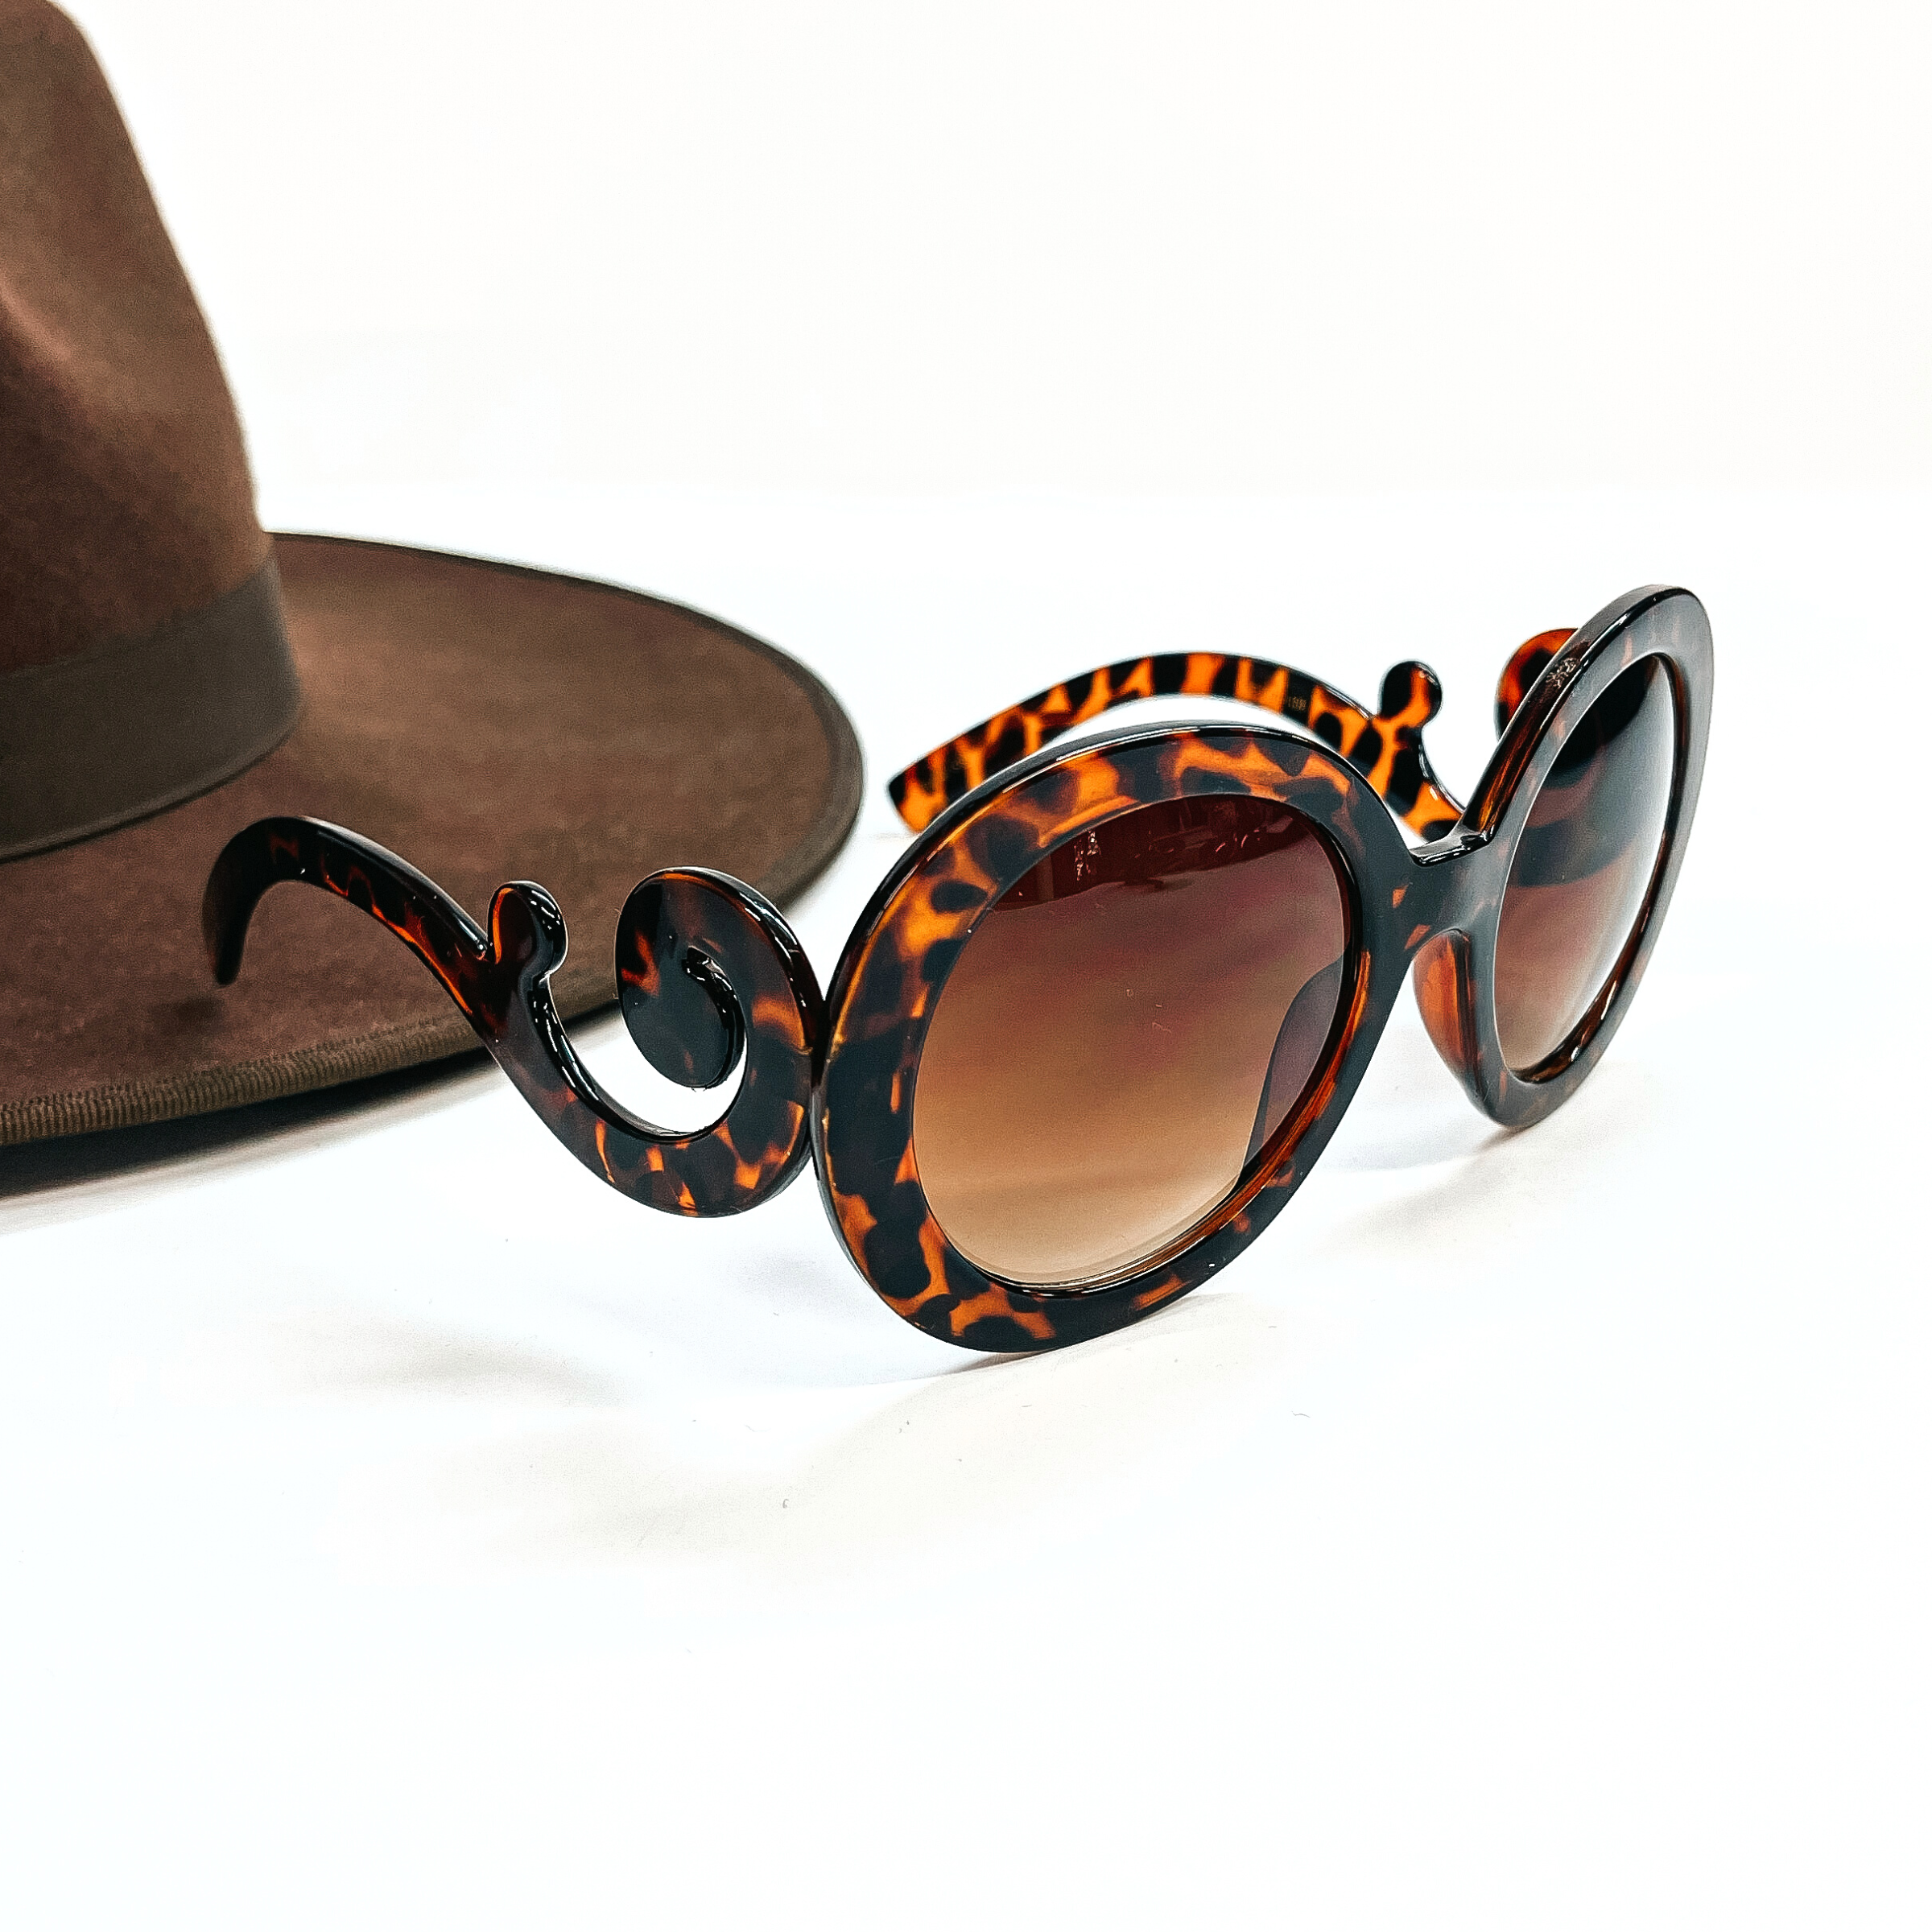 This is a brown pair of sunglasses, the frame is tortouise print with a  brown lense. The side parts of the sunglasses have a swirl. These sunglasses are taken on a white  background with a dark brown felt hat in the side as decor.